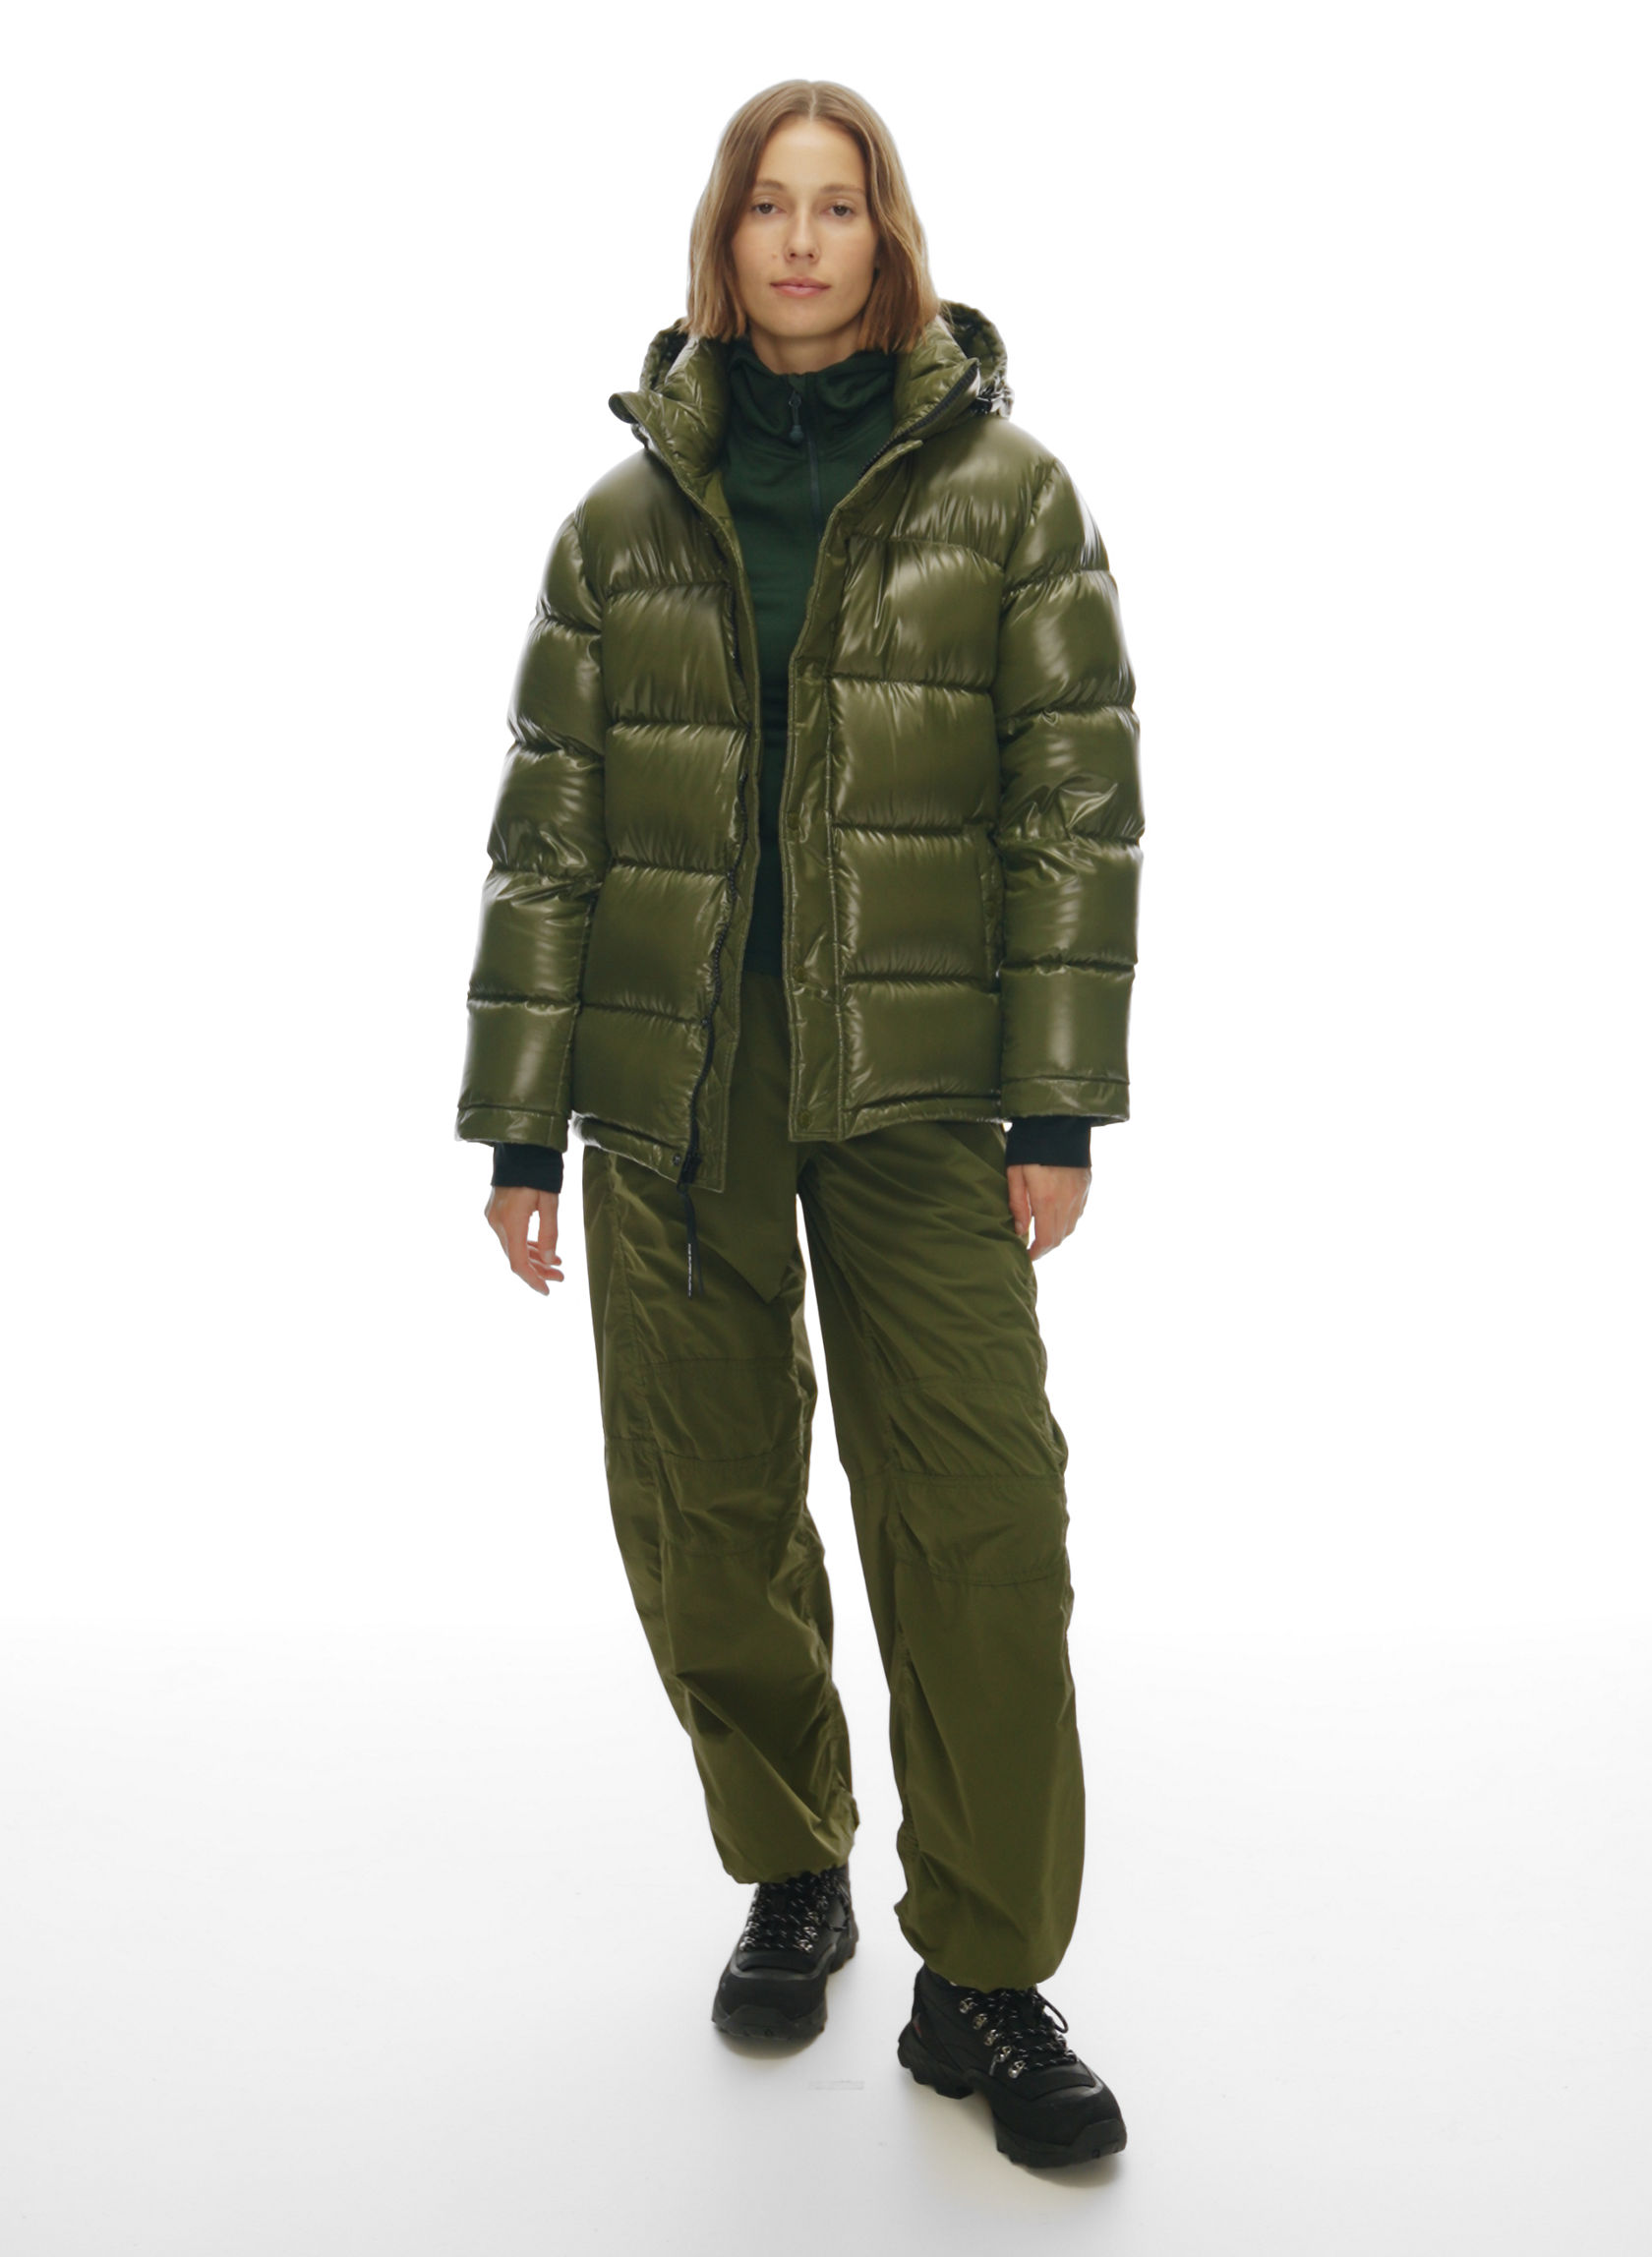 THE SUPER PUFF™ - Goose down puffer jacket made with Hi-Gloss fabric from France